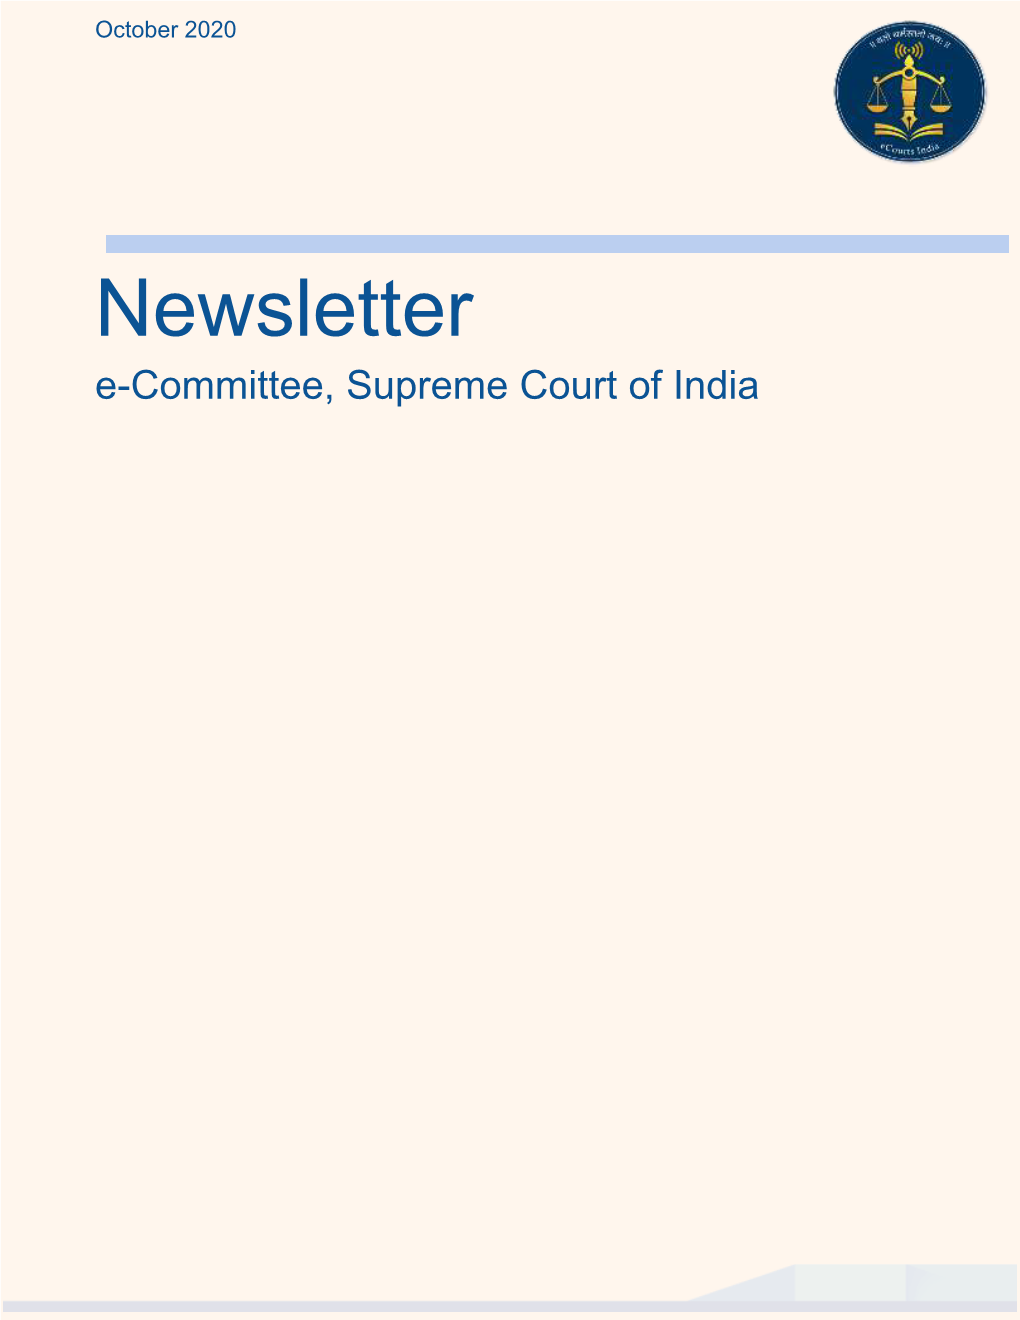 Newsletter E-Committee, Supreme Court of India October-2020